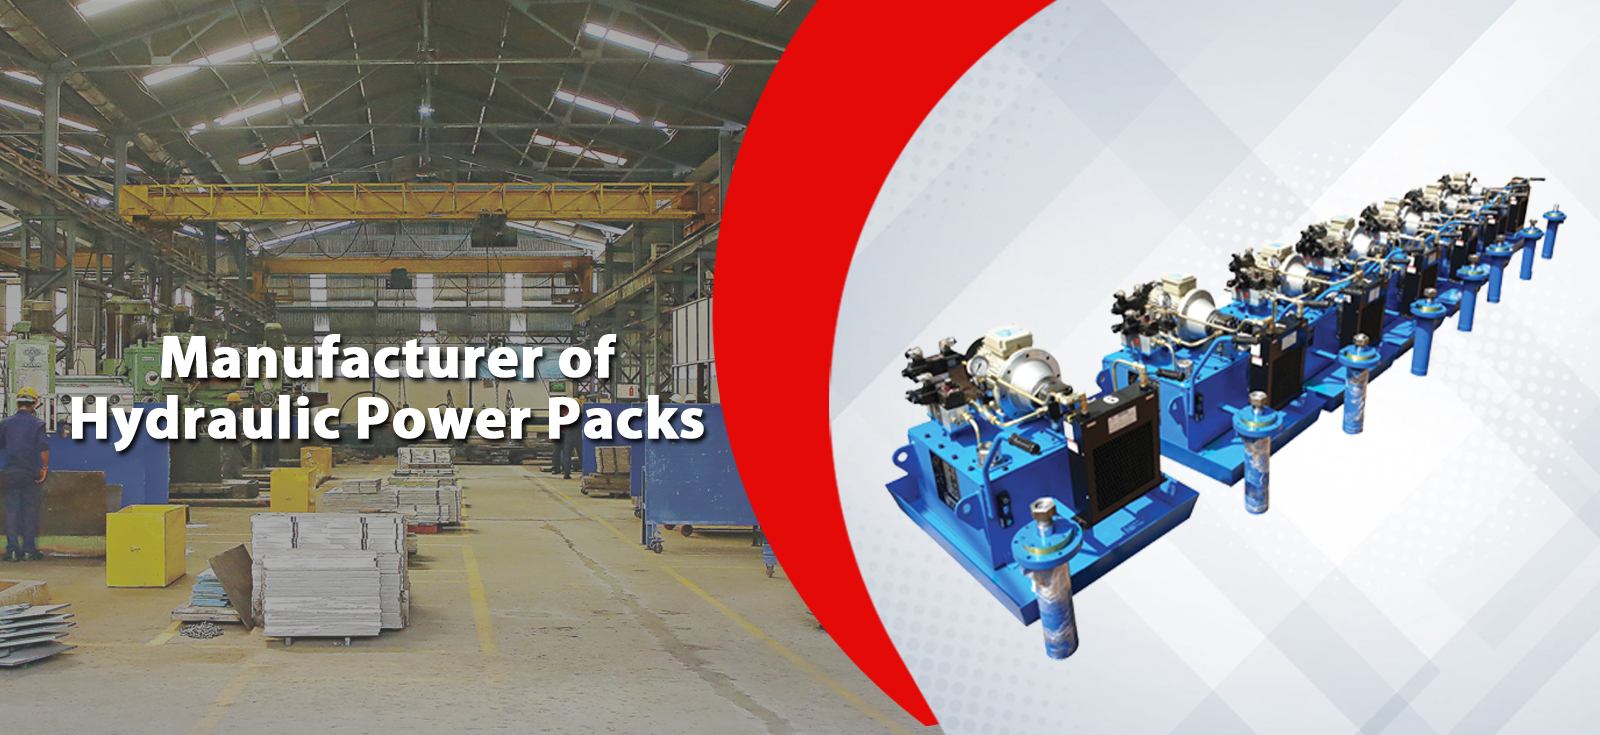 Manufacturer of Hydraulic Power Packs